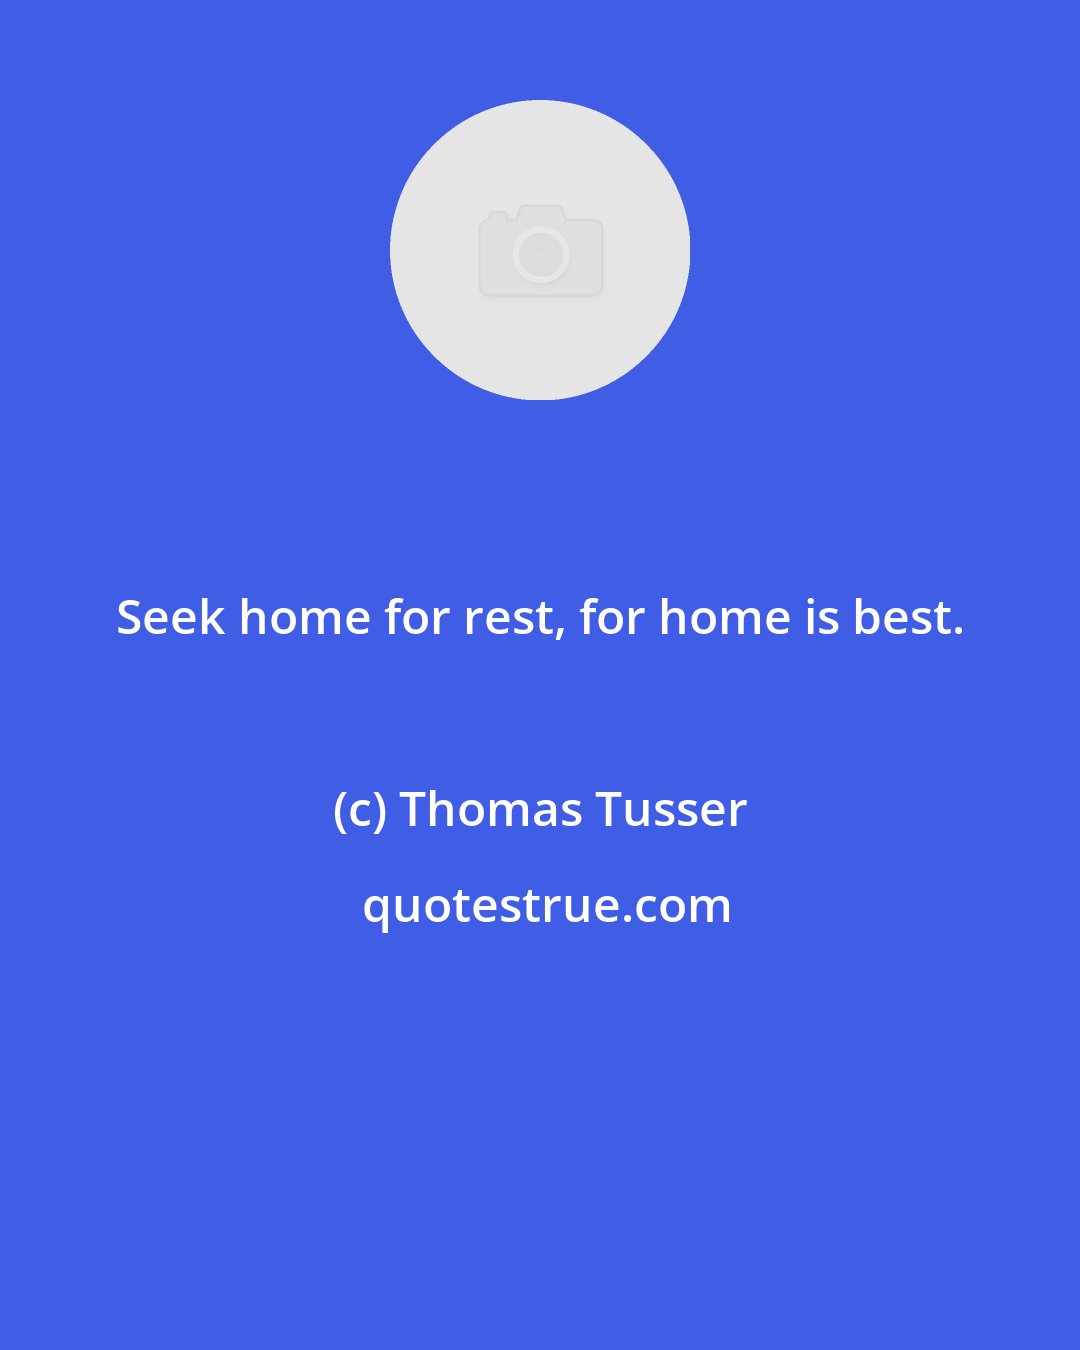 Thomas Tusser: Seek home for rest, for home is best.